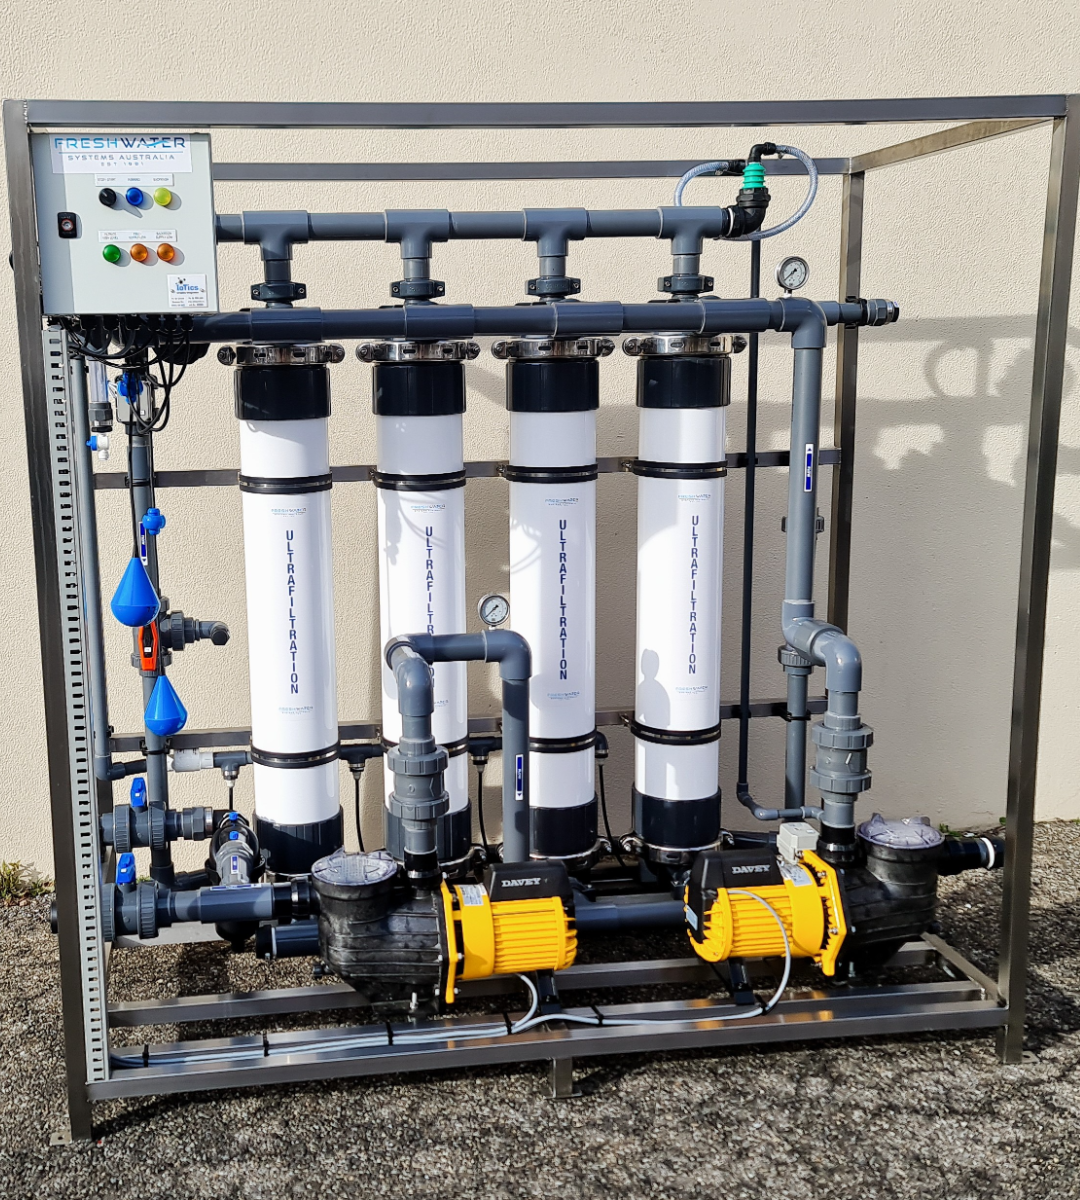 River Water Filtration System